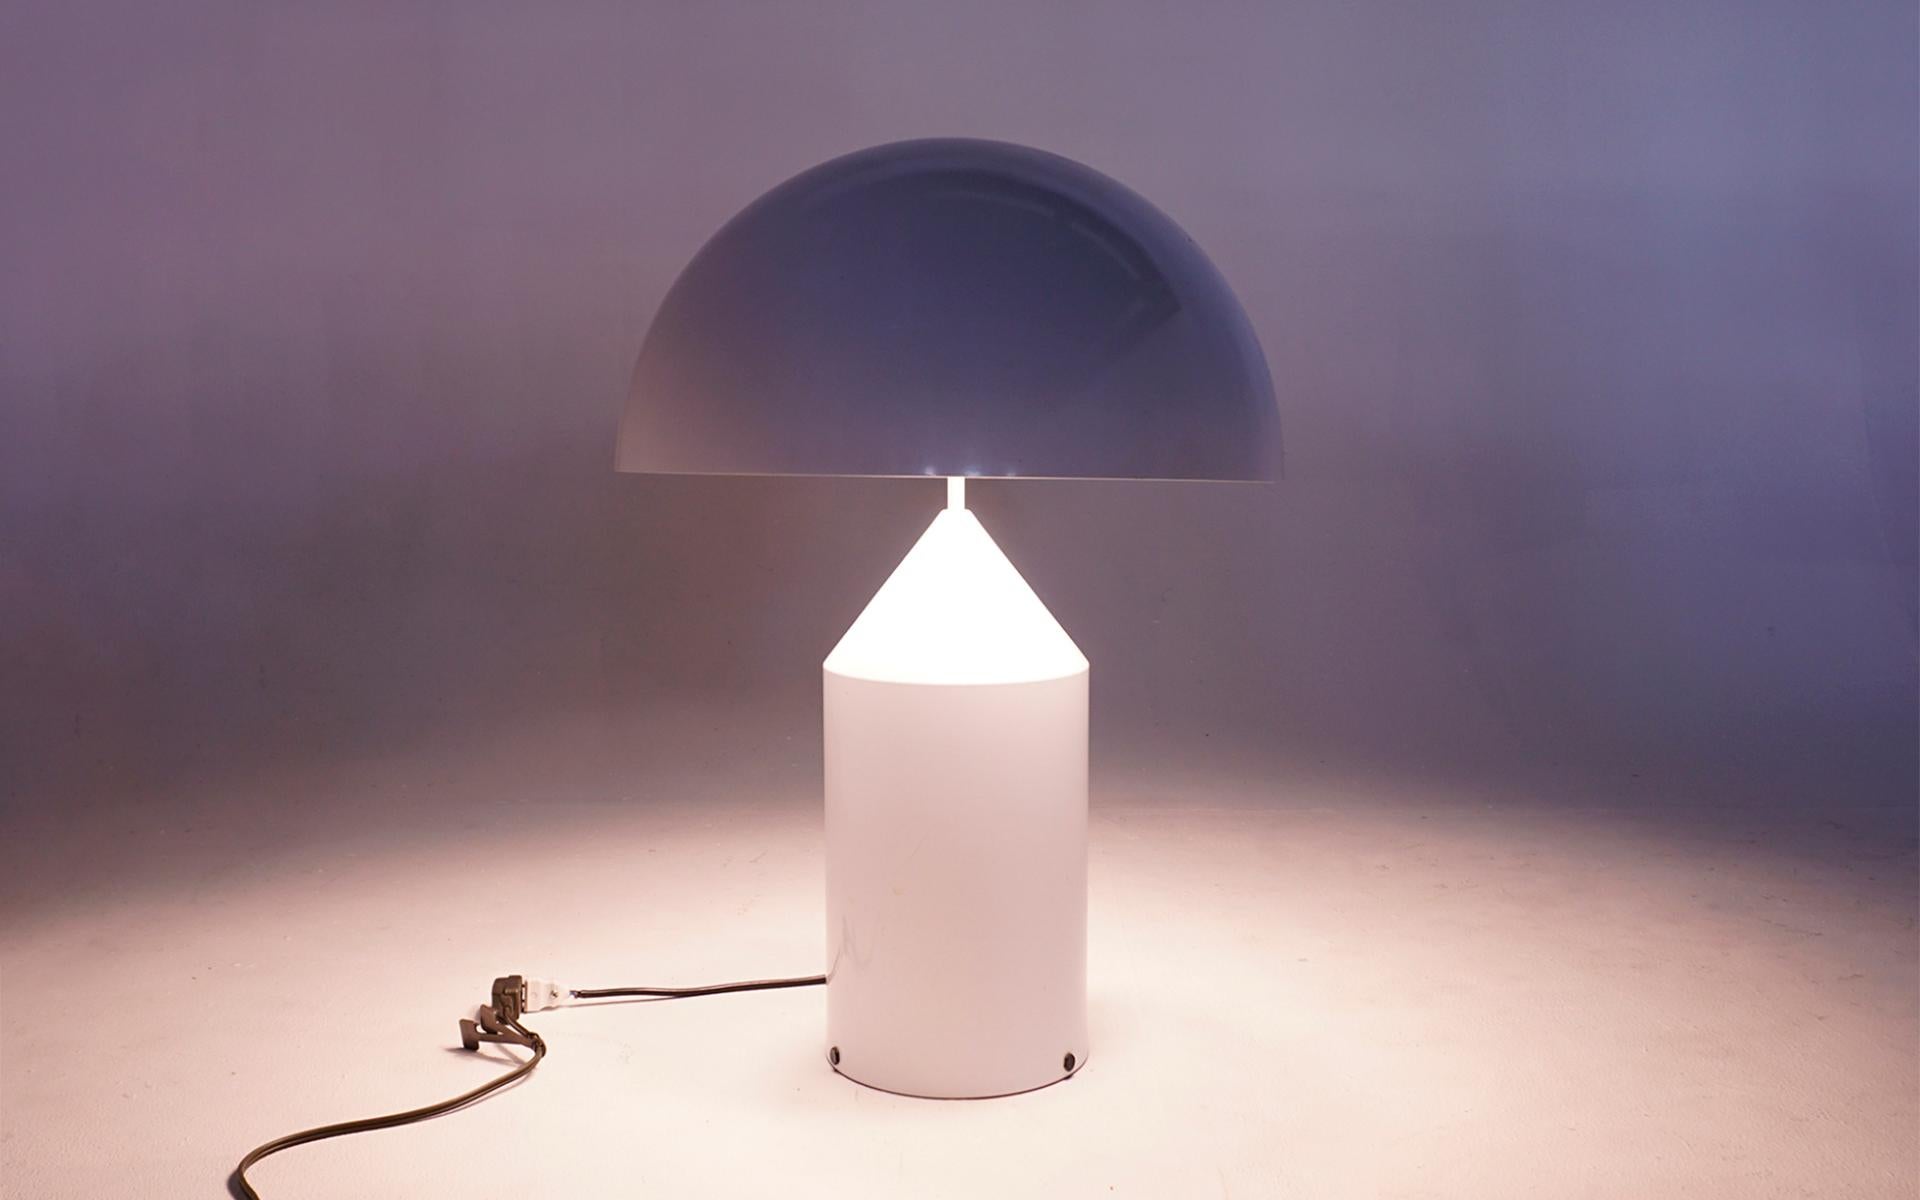 Early production white enameled steel table lamp designed by Vico Magistretti. This example was purchased by the original owner, an architect, in London in the 1980s. It has been with that one owner ever since. Beautiful example in very good to